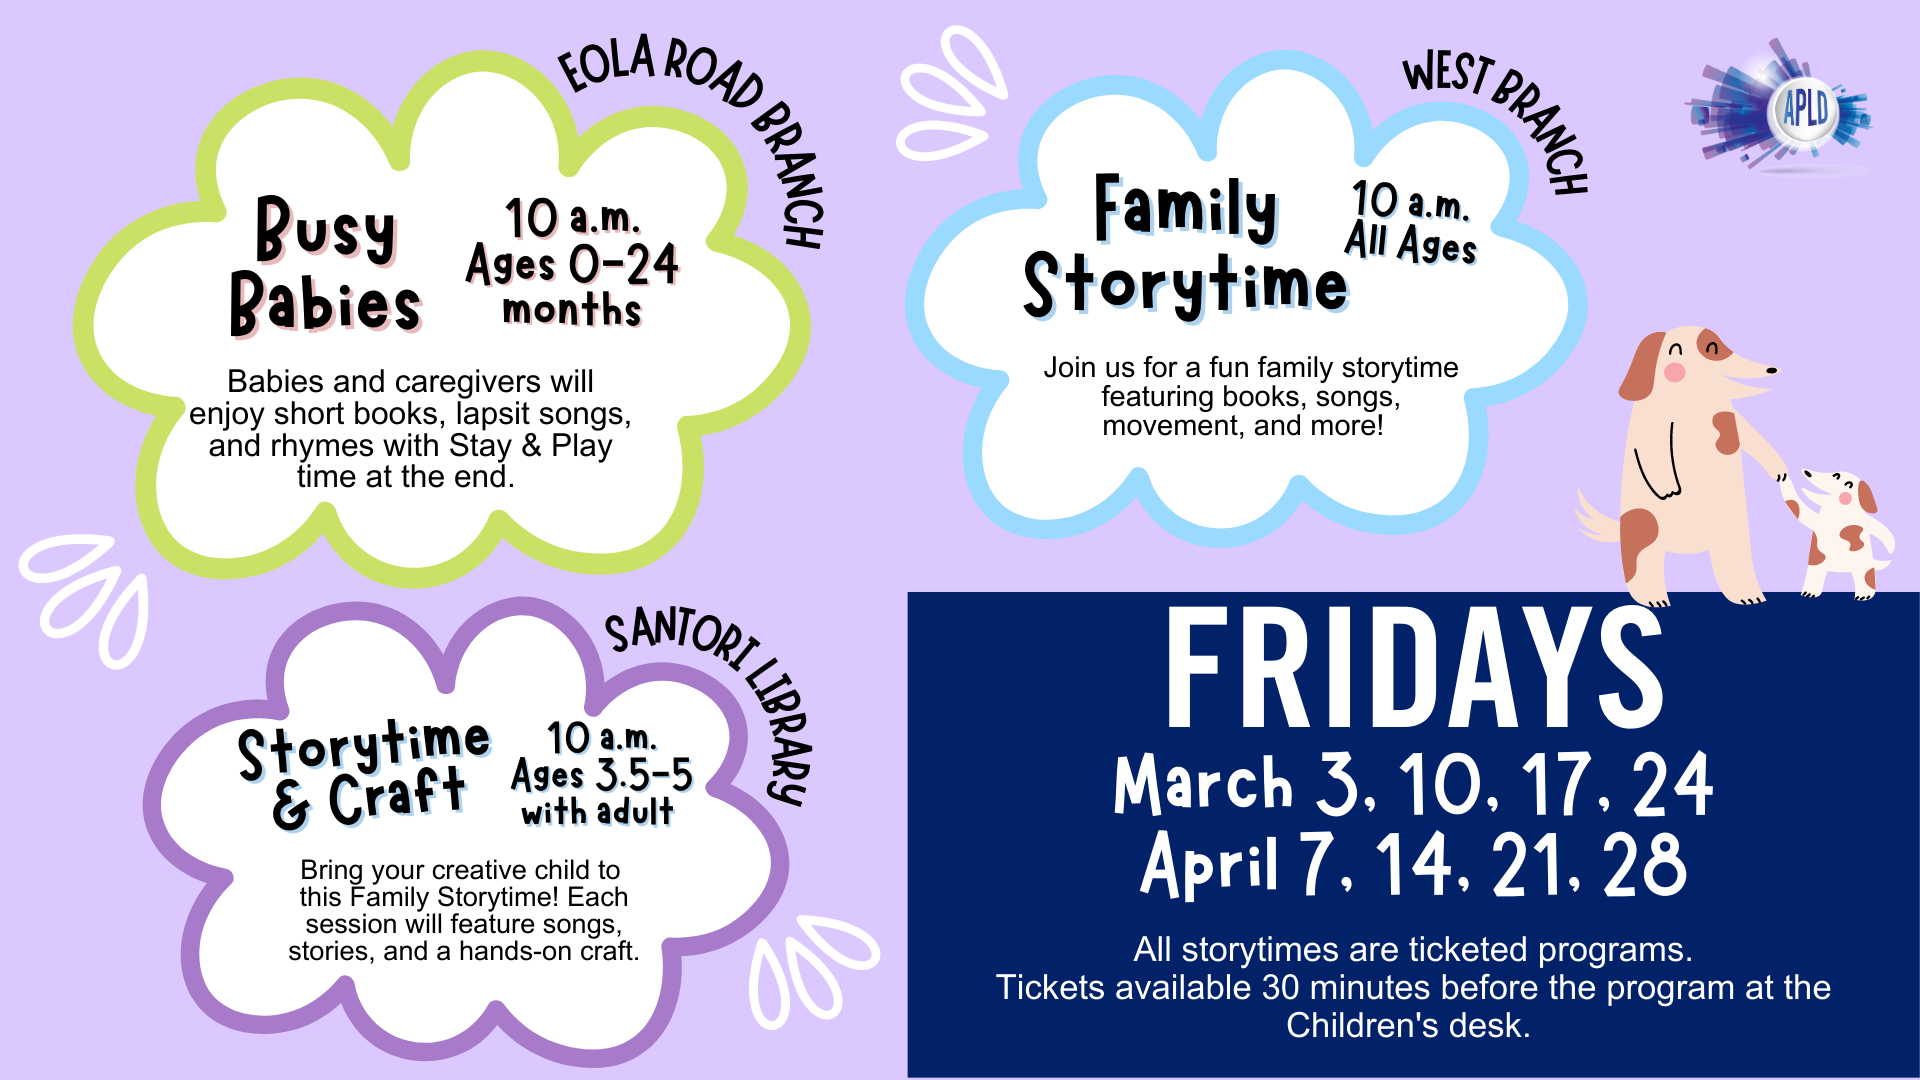 March/ April Storytimes Fridays